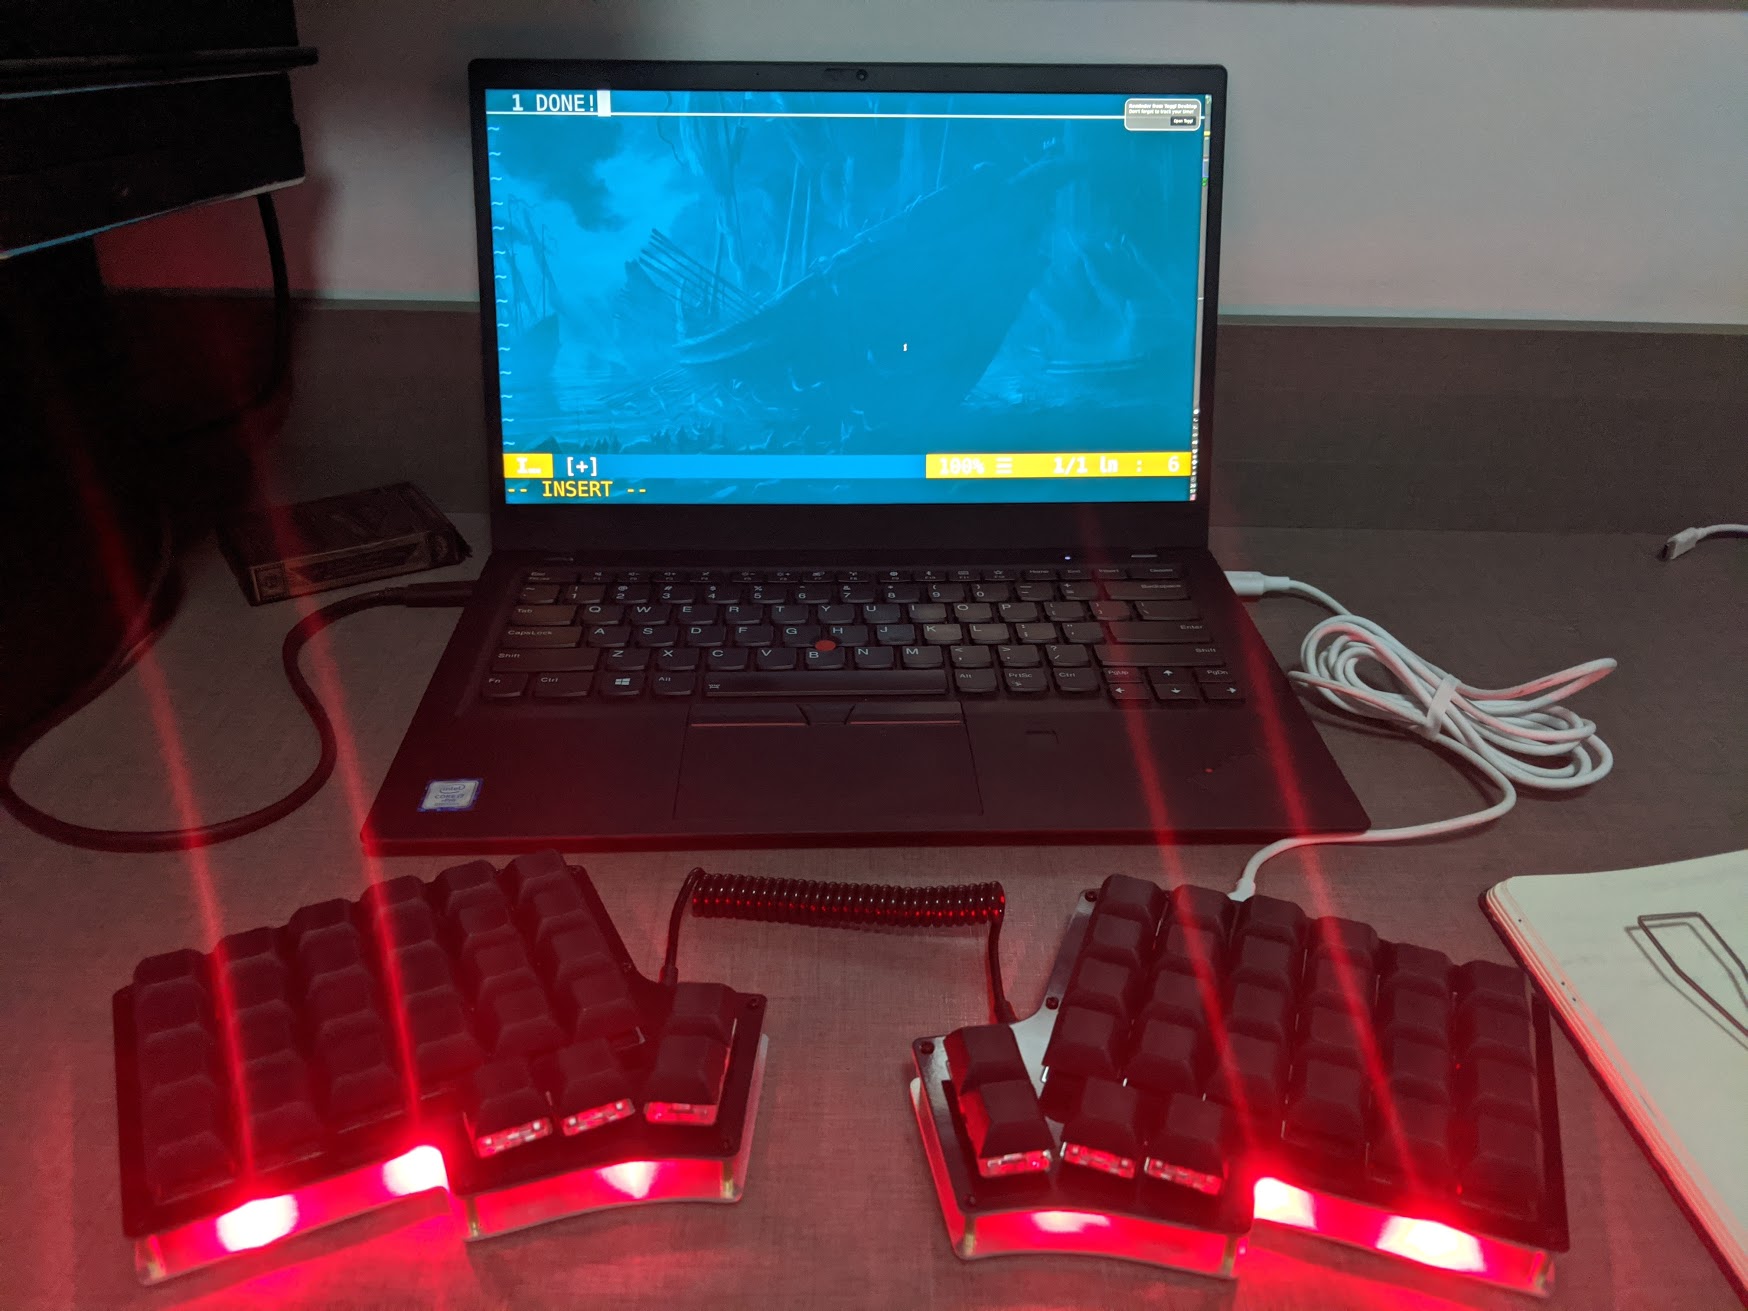 The laptop running Vim with the text &ldquo;DONE!&rdquo; written. The completed keyboard with red LEDs below